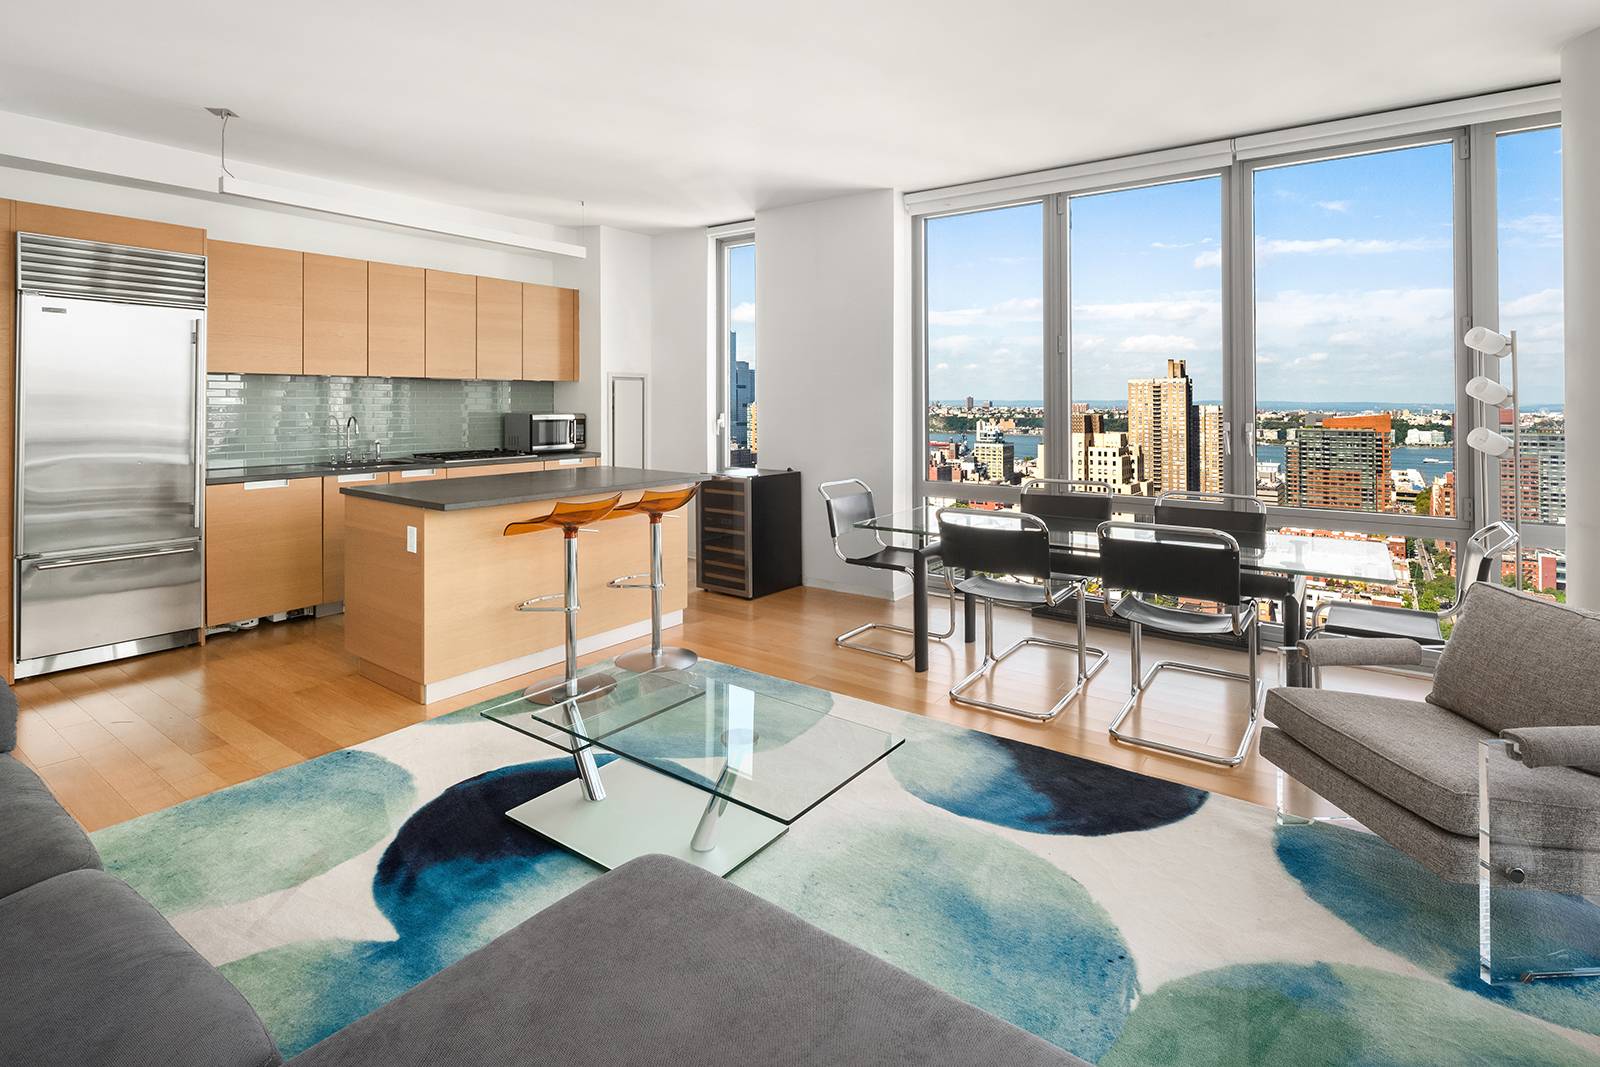 Bring your shades for gorgeous sunsets over the Hudson River at The Link condominium !